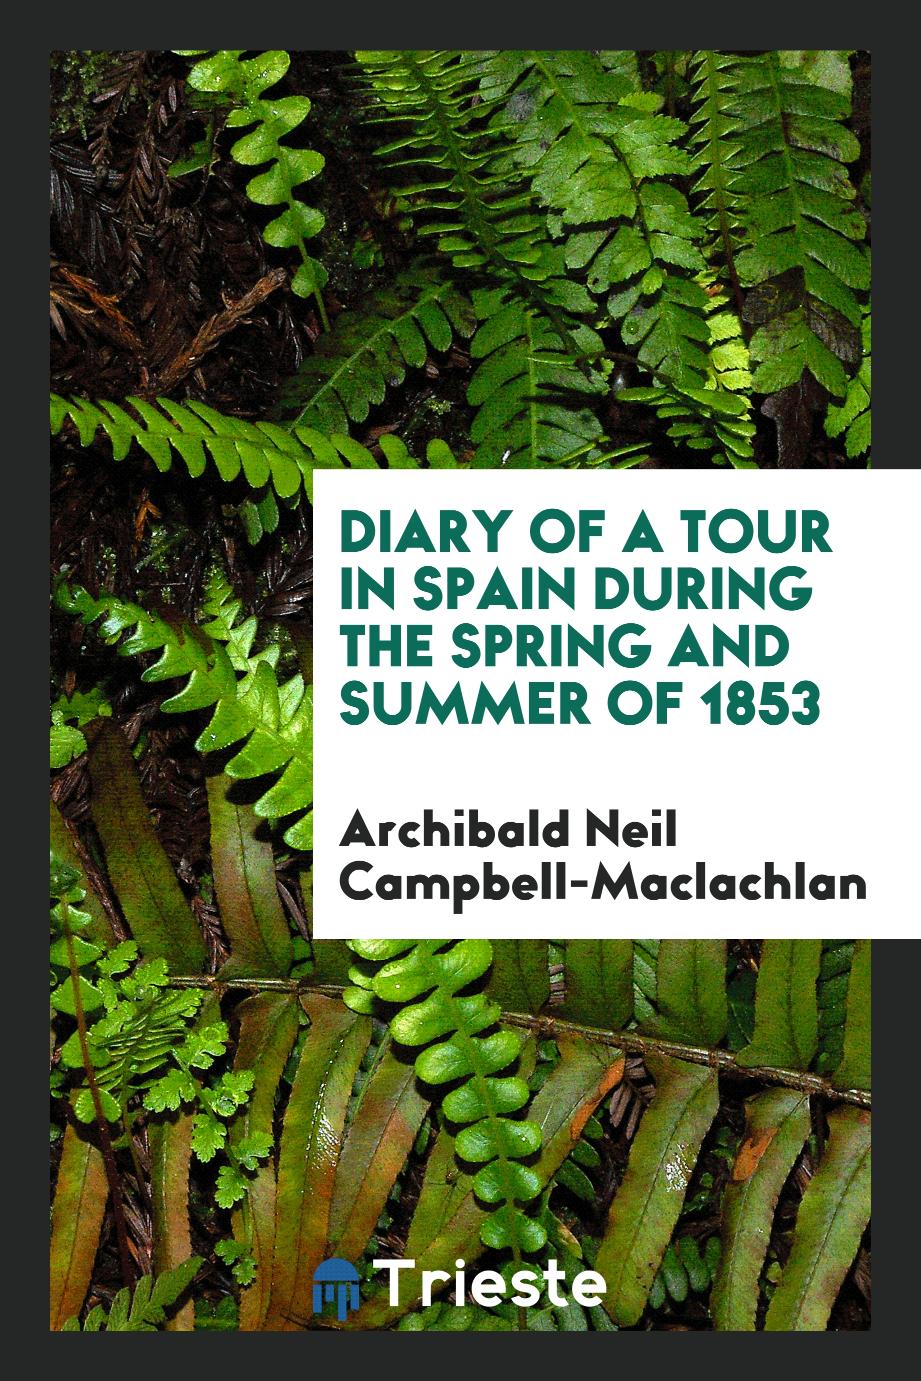 Diary of a Tour in Spain during the Spring and Summer of 1853